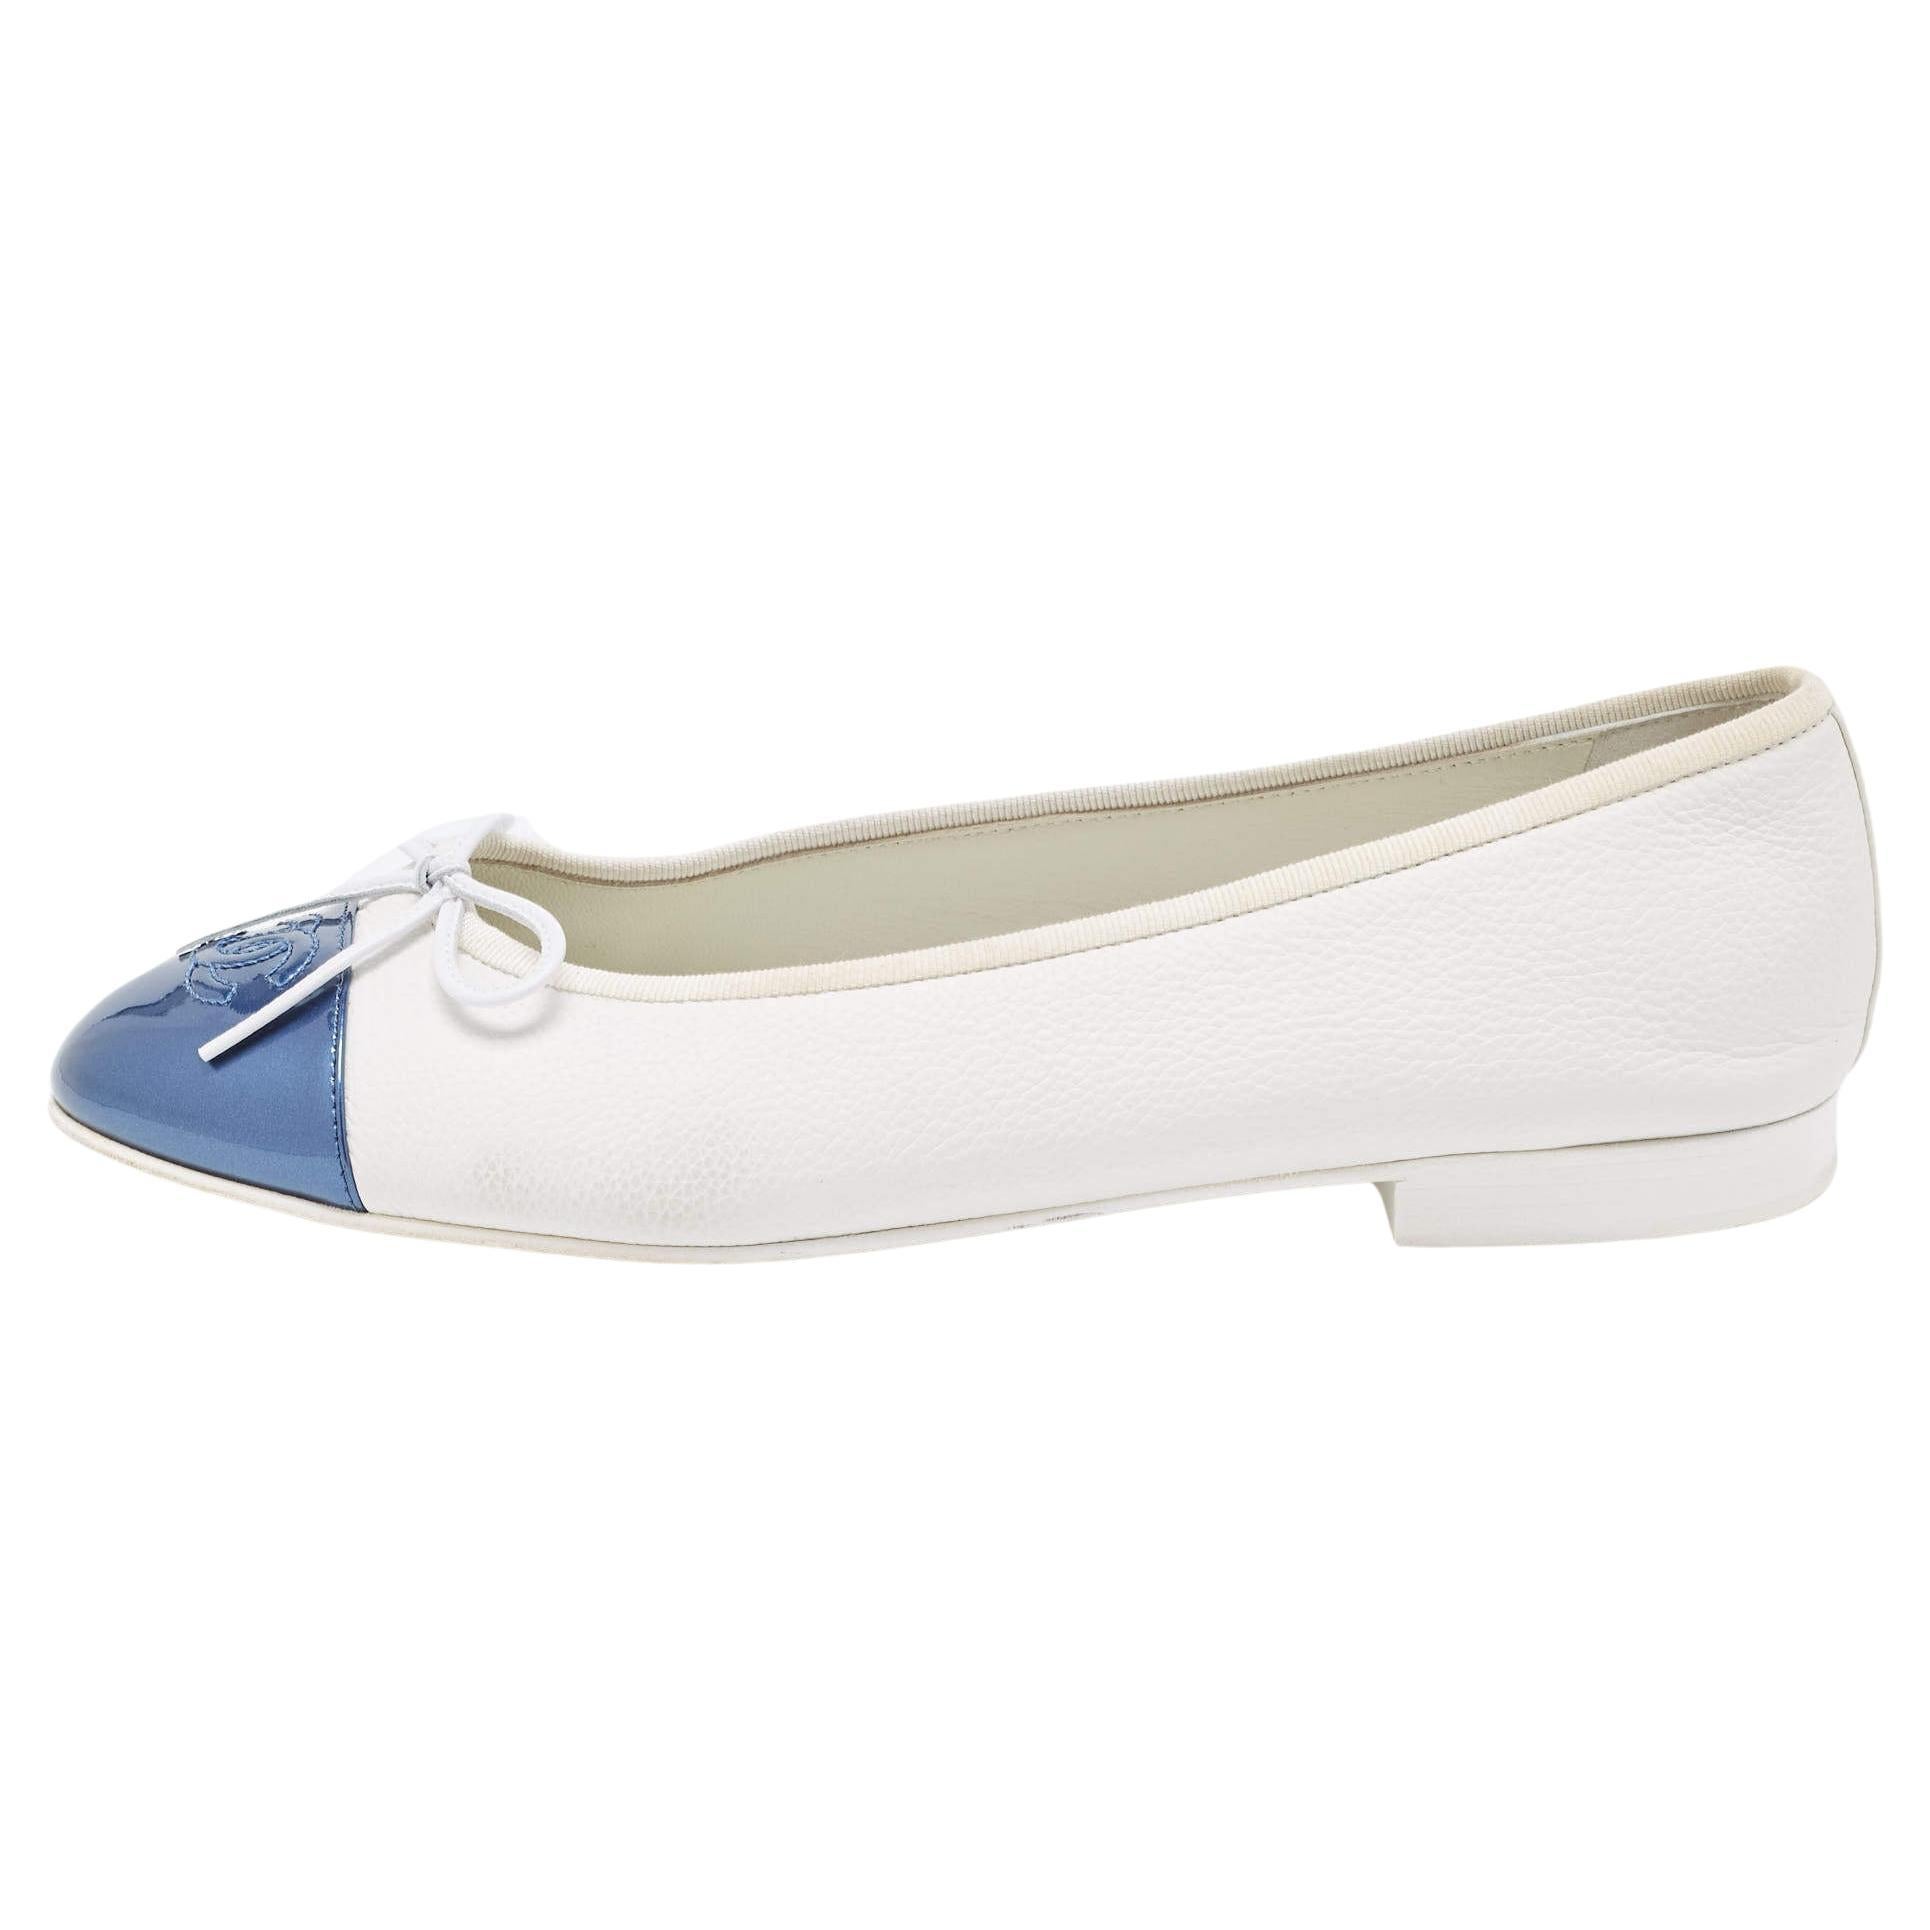 Chanel White/Blue Leather and Patent CC Cap Toe Bow Ballet Flats Size 40